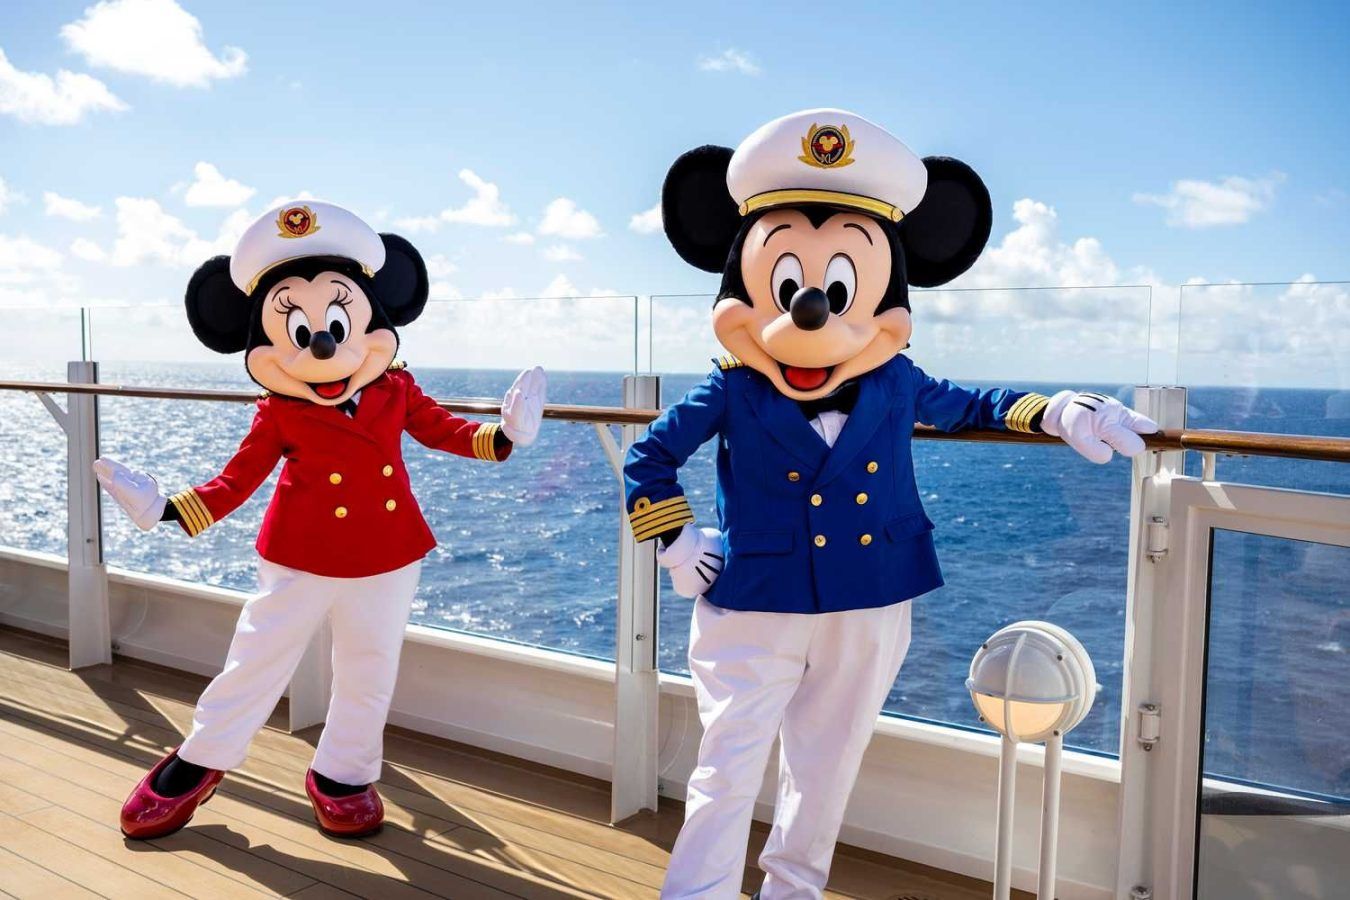 Disney Cruise in Singapore Details, itinerary, booking prices, and more